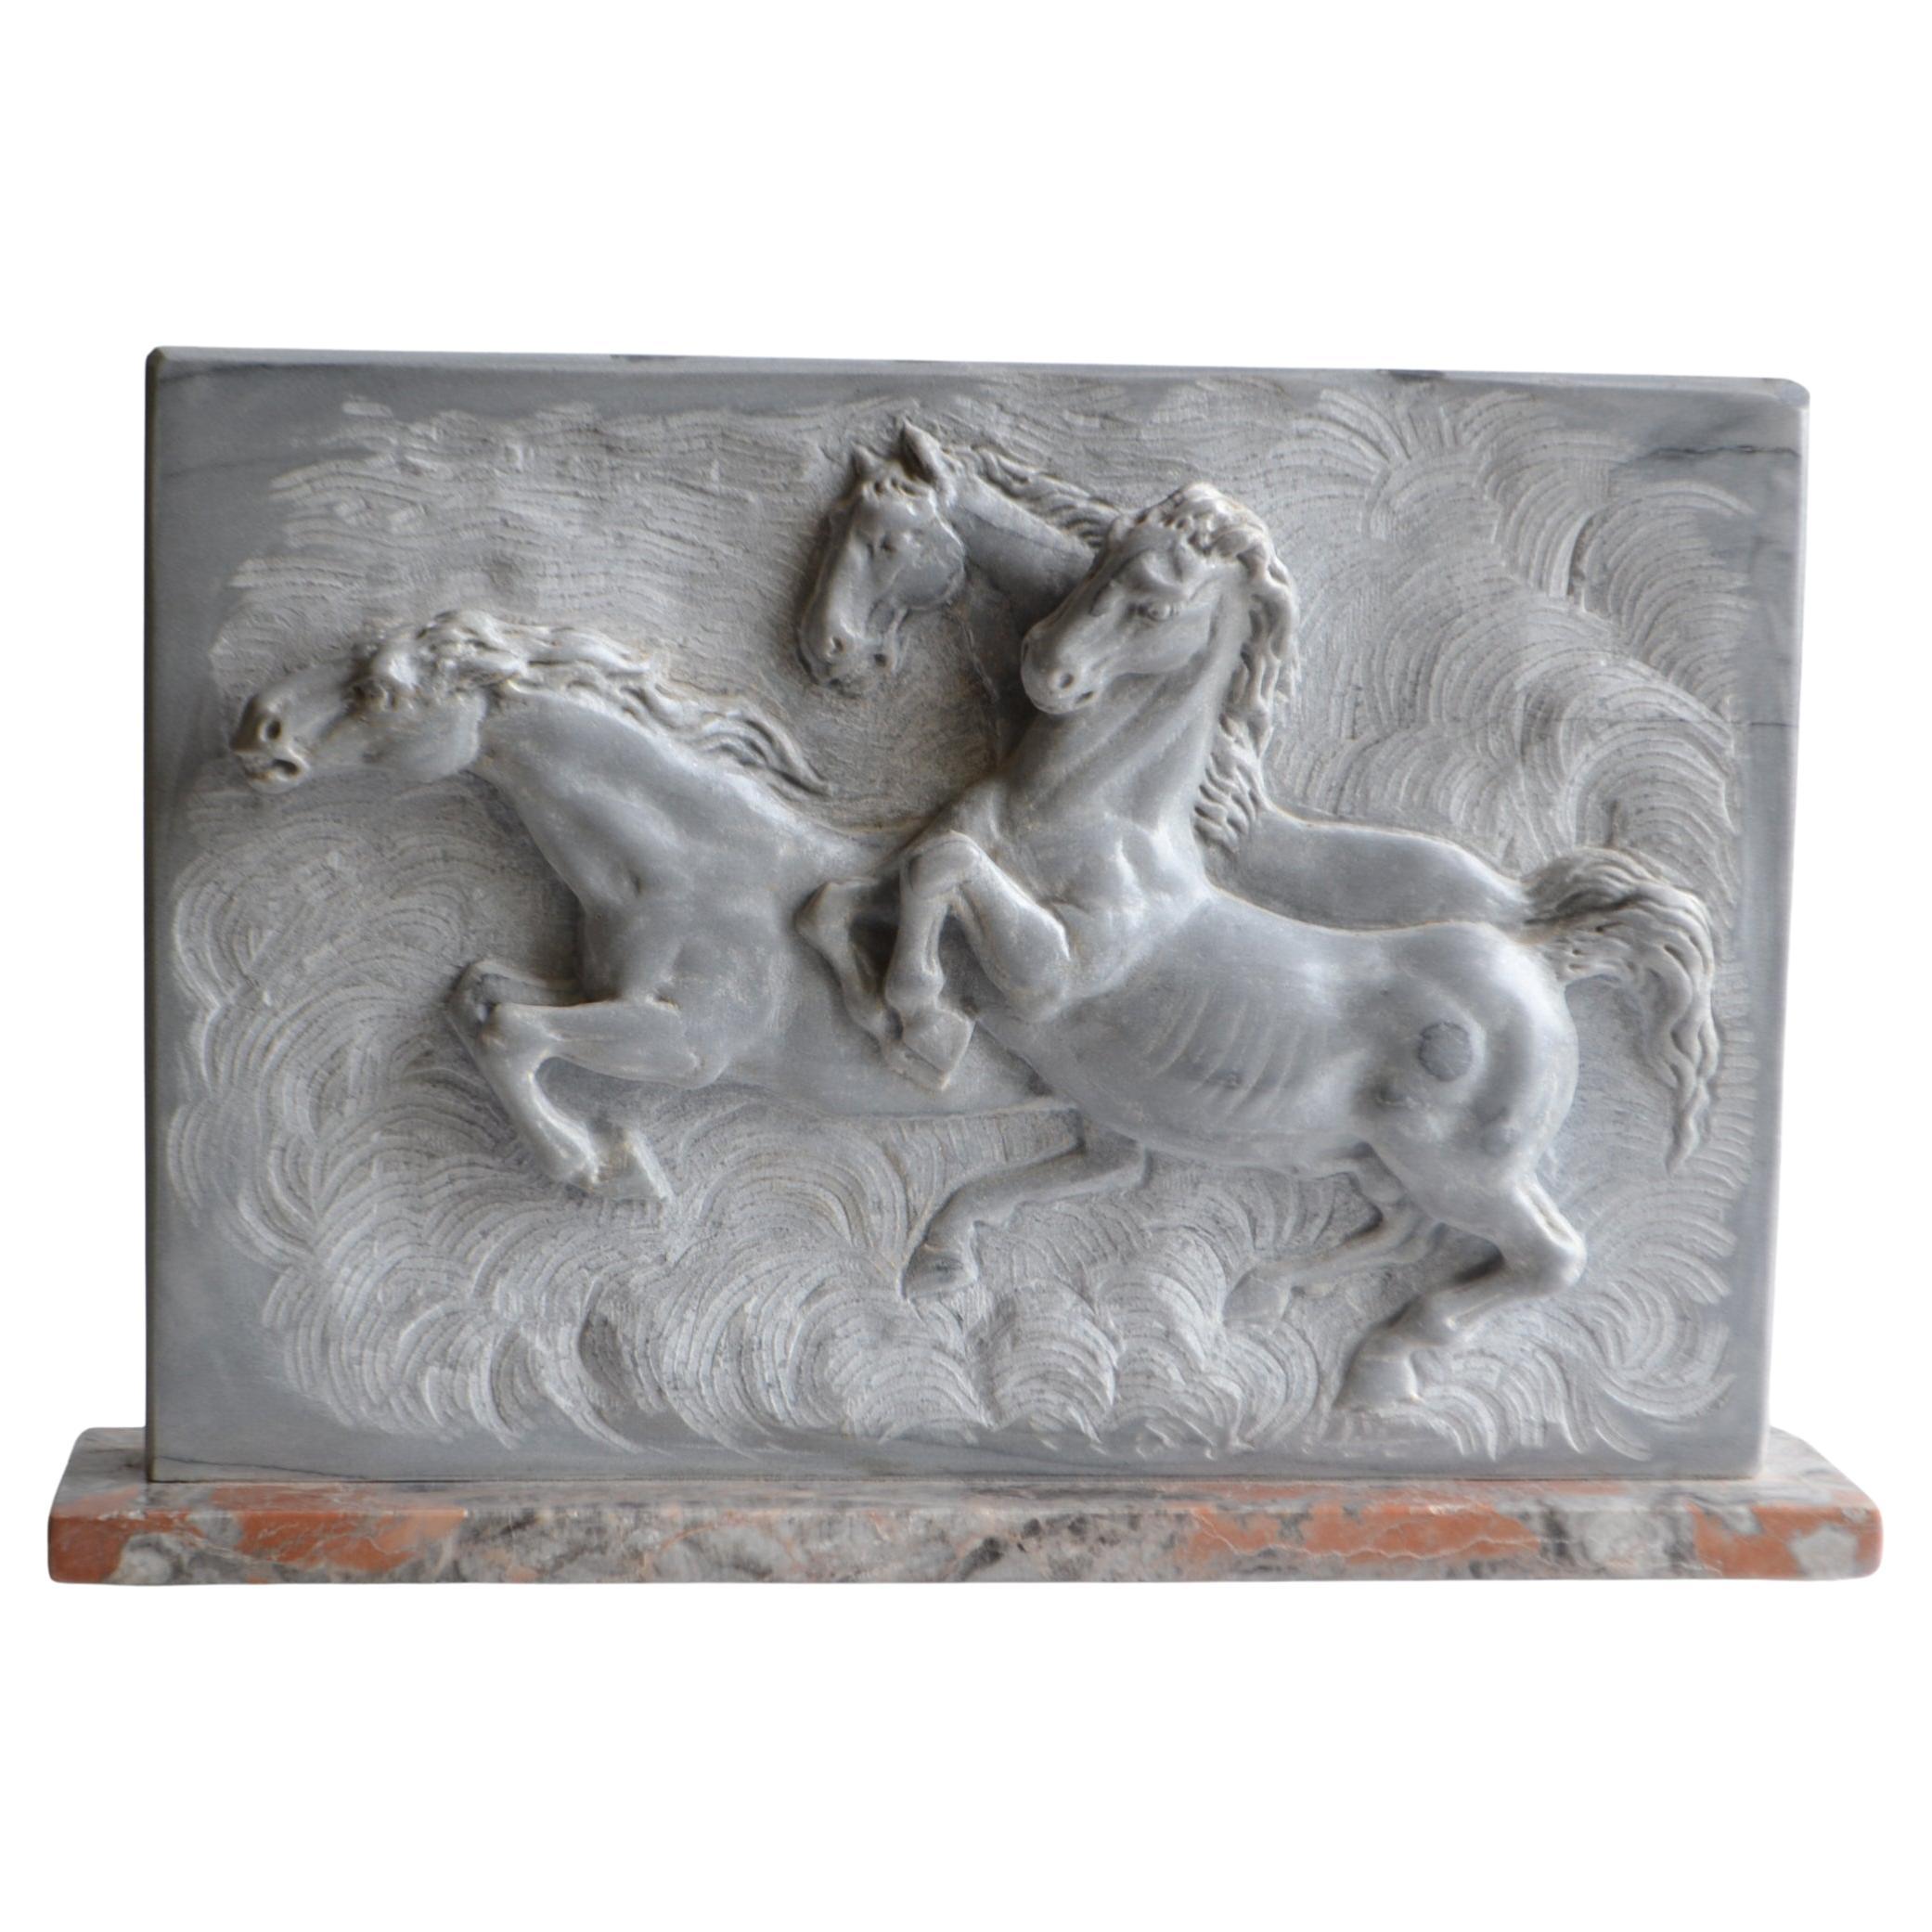 High relief of running horses carved on Italian Bardiglio marble